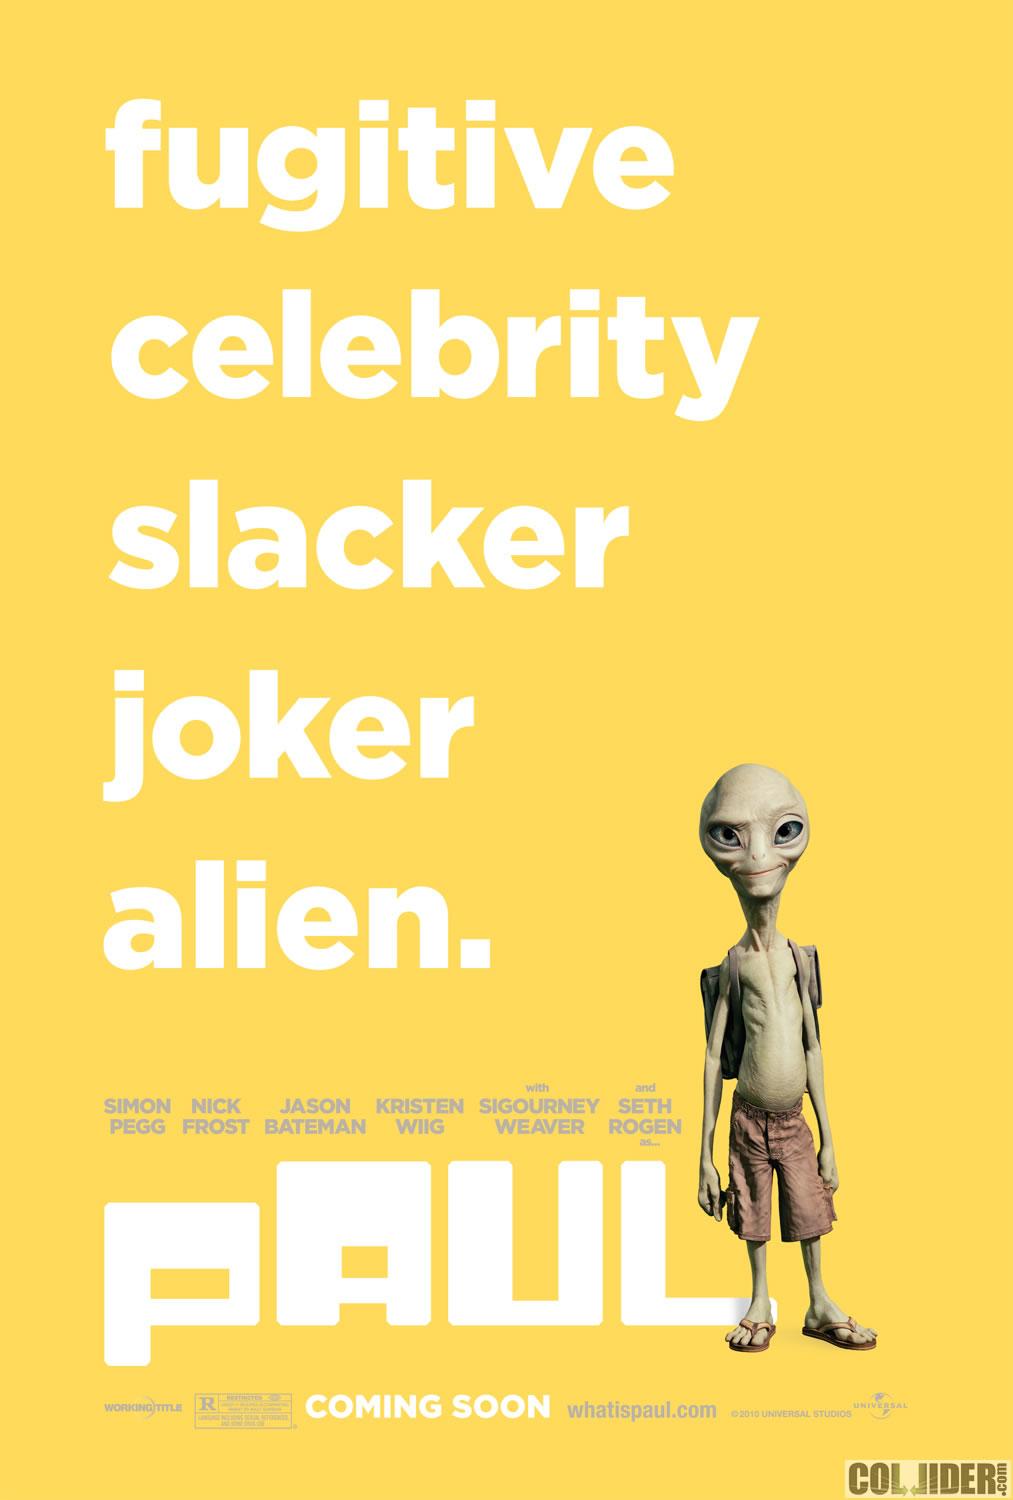 http://collider.com/wp-content/uploads/paul_movie_poster_tagged_001.jpg